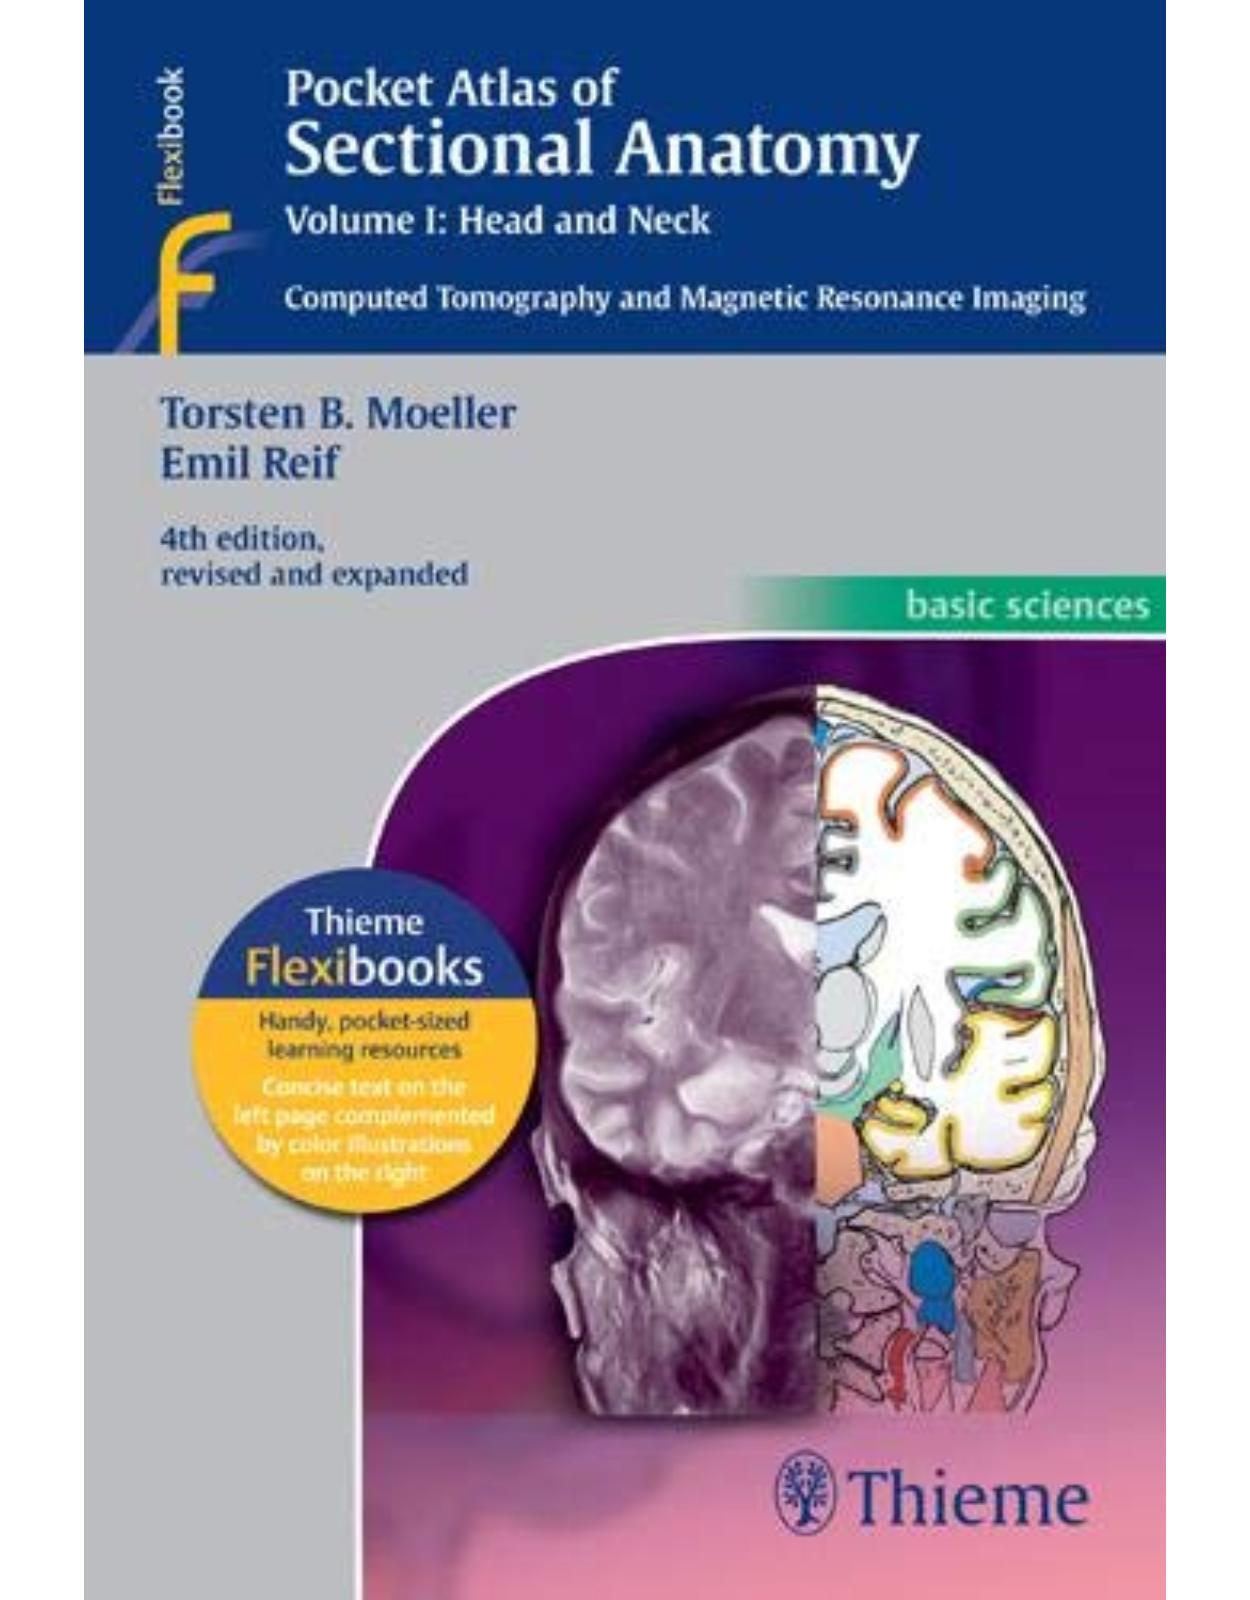 Pocket Atlas of Sectional Anatomy, Volume I: Head and Neck/ Computed Tomography and Magnetic Resonance Imaging 